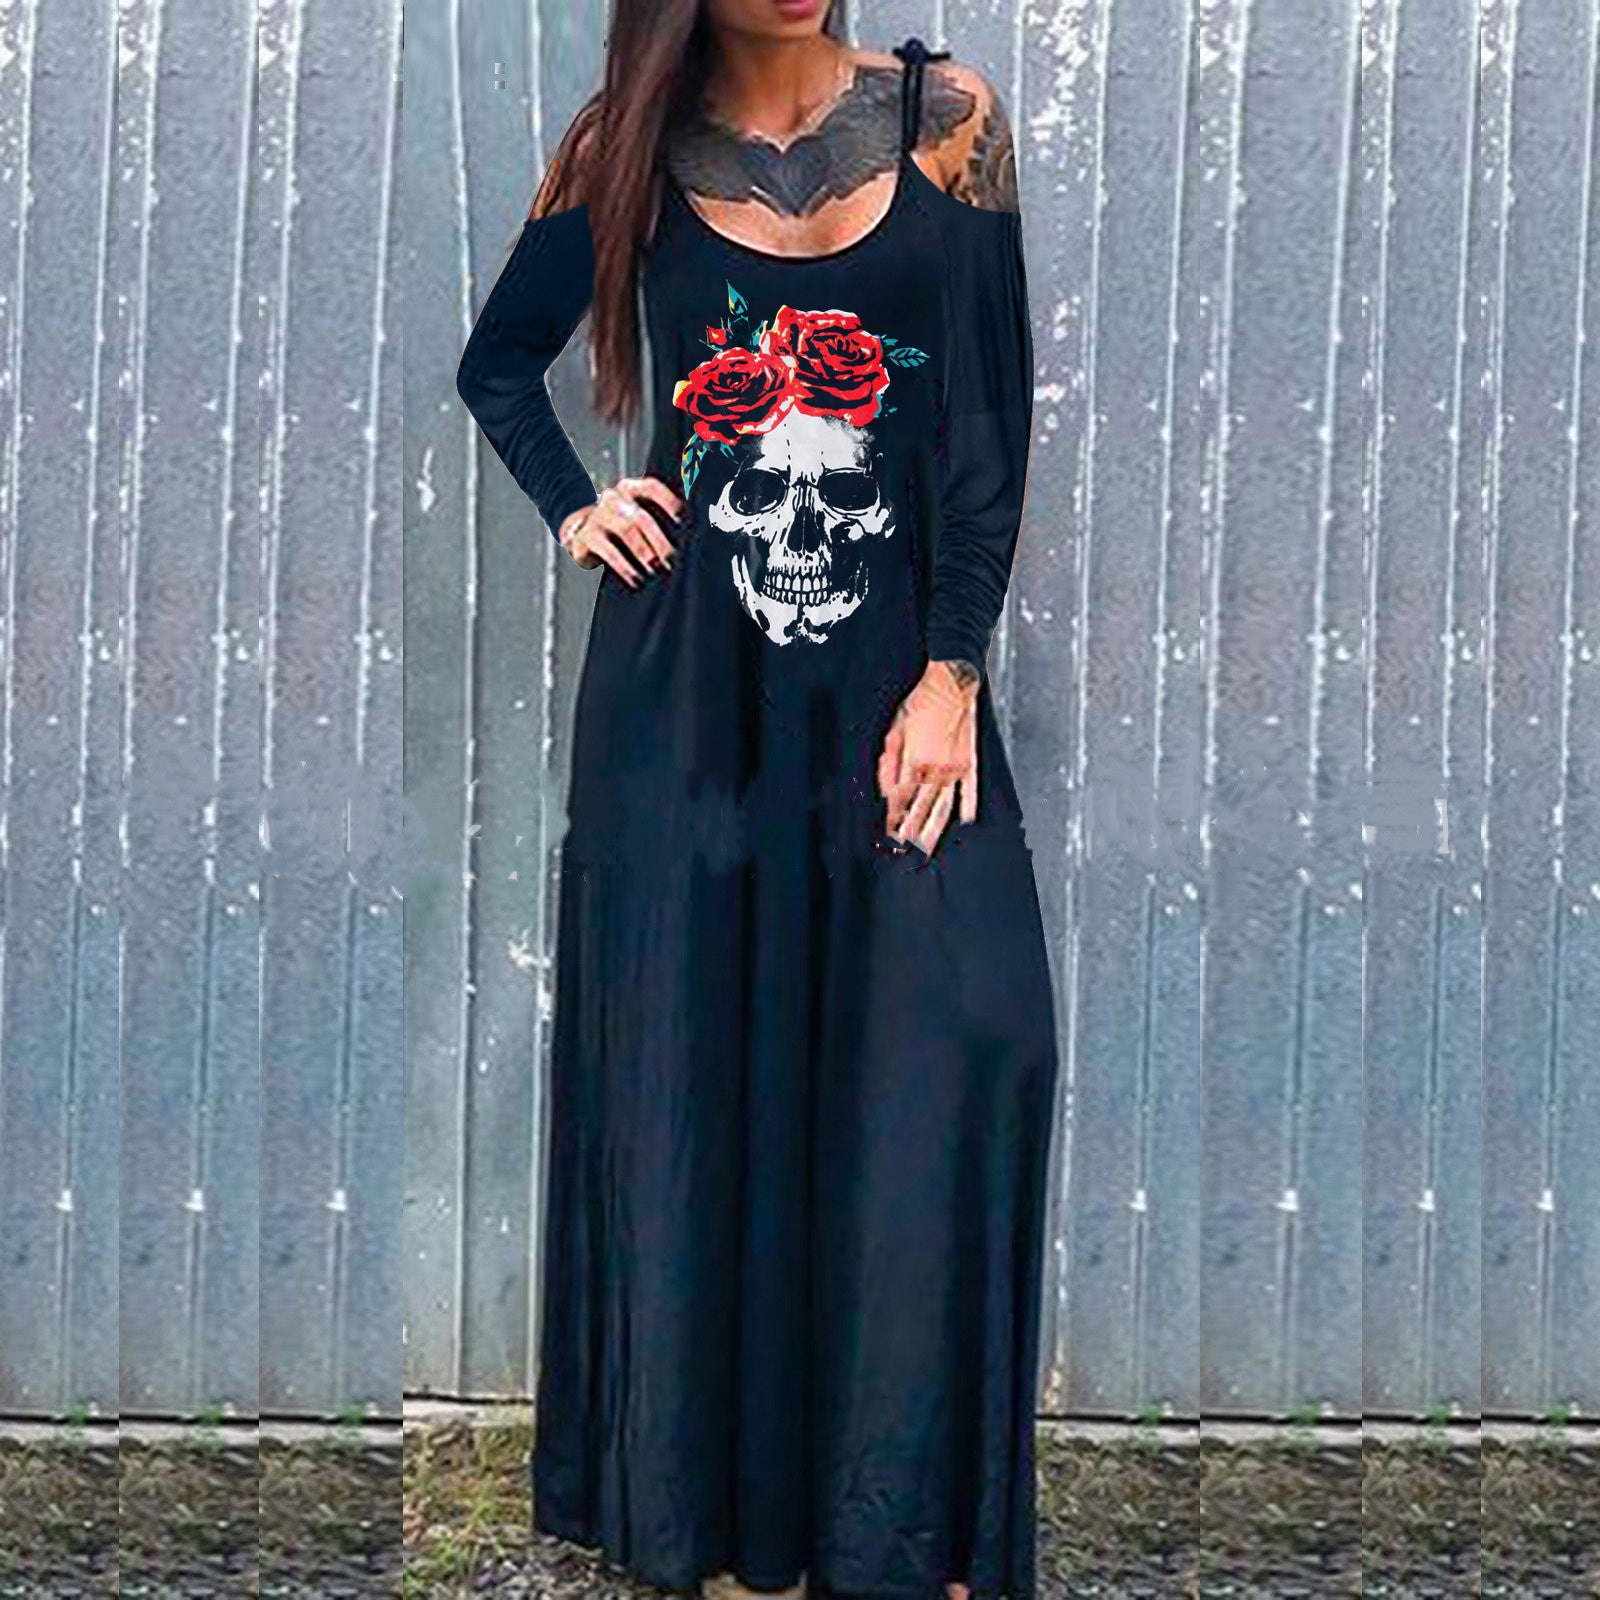 A woman in a ghoulishly glam black dress with a skull print wearing the Maramalive™ Drop Dead Gorgeous - Strap Style Skull Mid-length Print Dress.